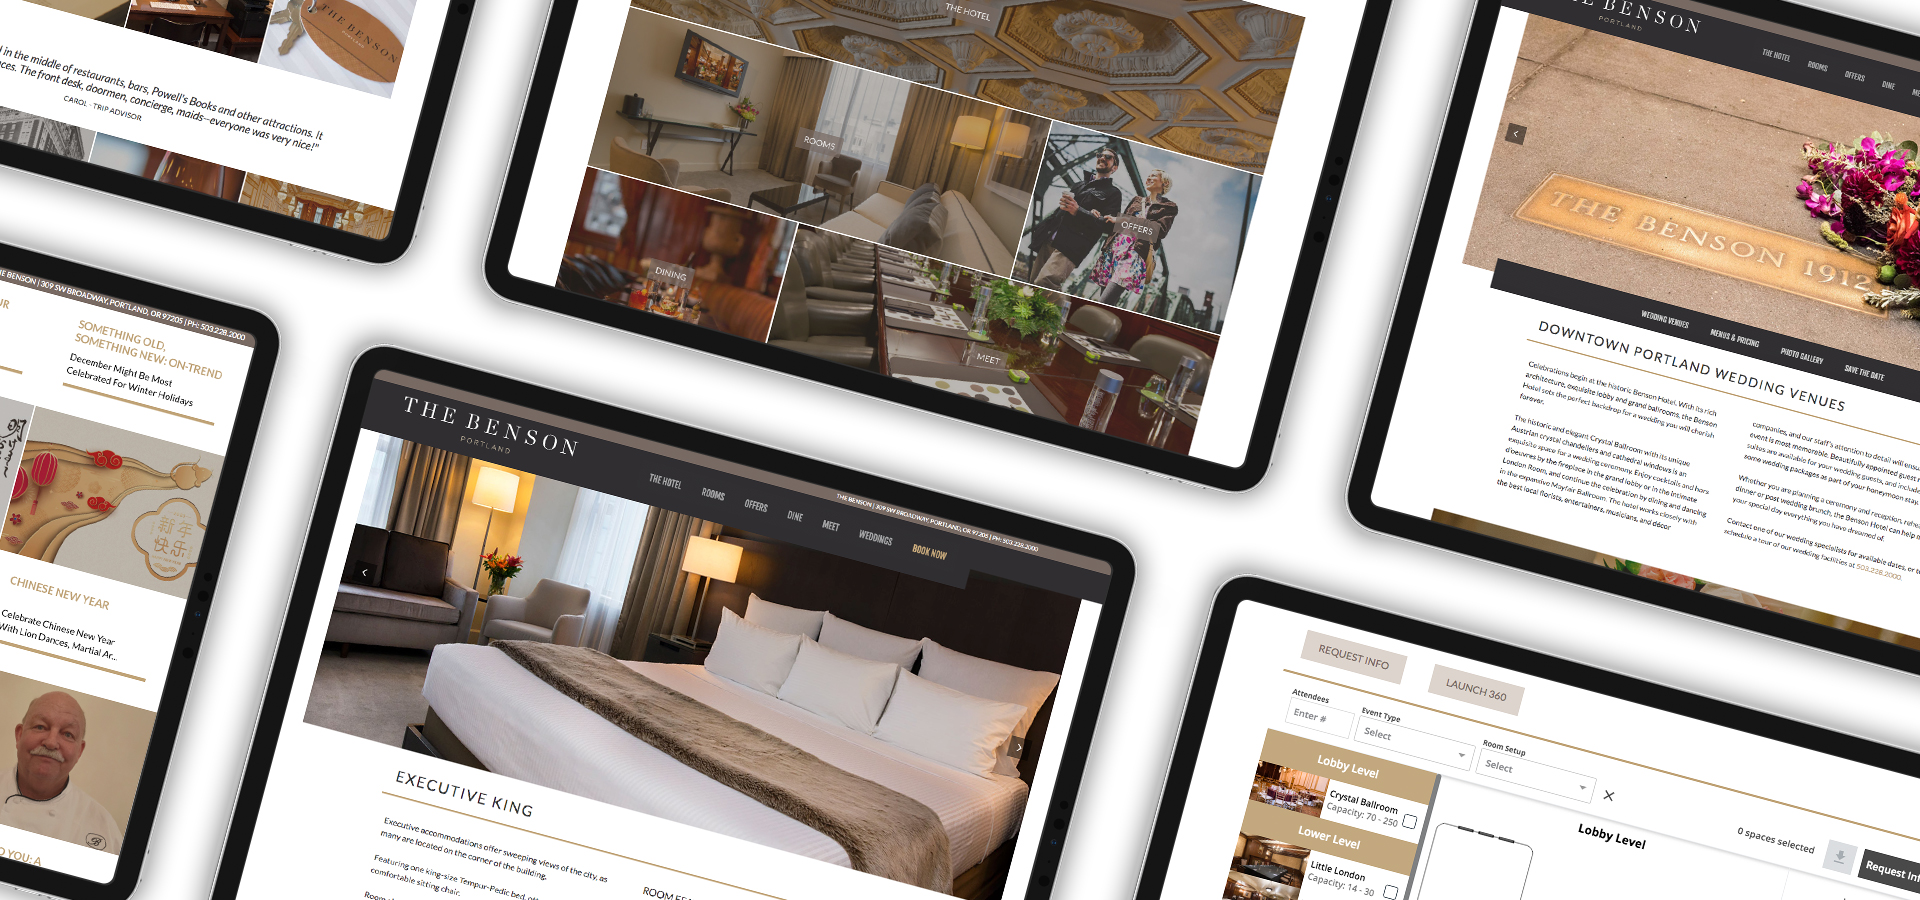 The Benson Hotel Website Design Layouts | Hotel Marketing Firm in Seattle | CMA